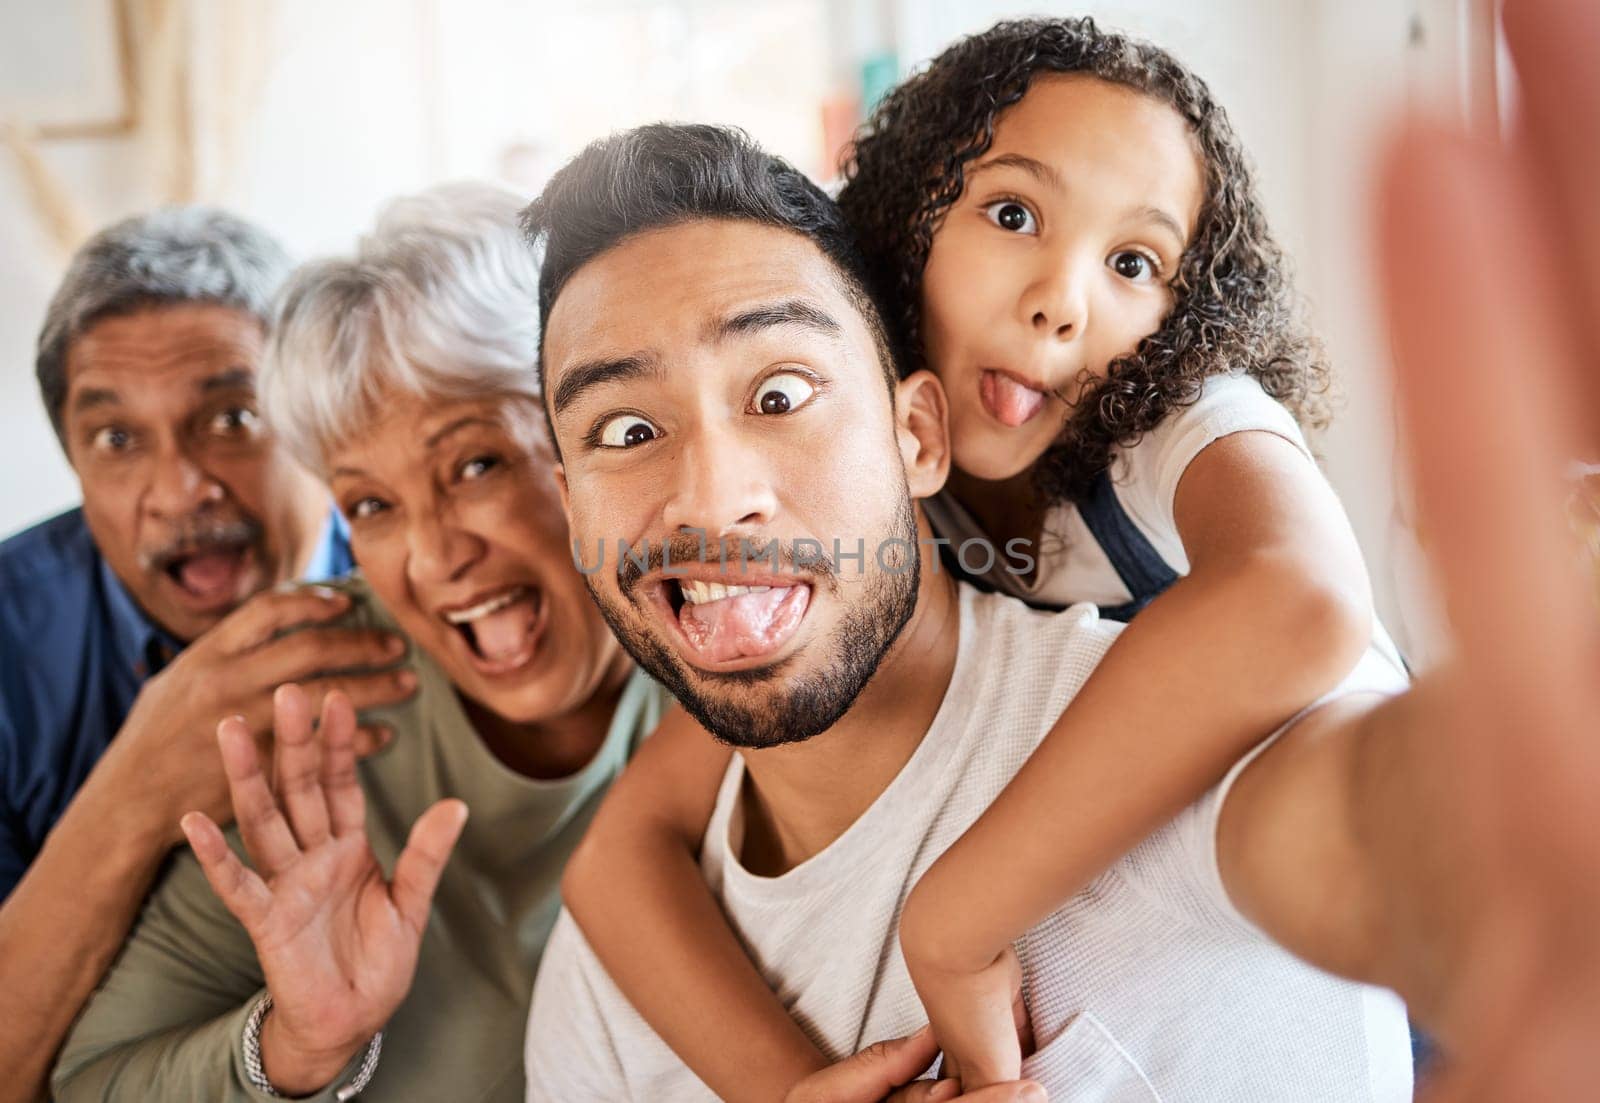 Happy family, portrait and silly face selfie for social media, vlog or funny online post at home. Grandparents, father and child with goofy expression for photo, memory or profile picture together.